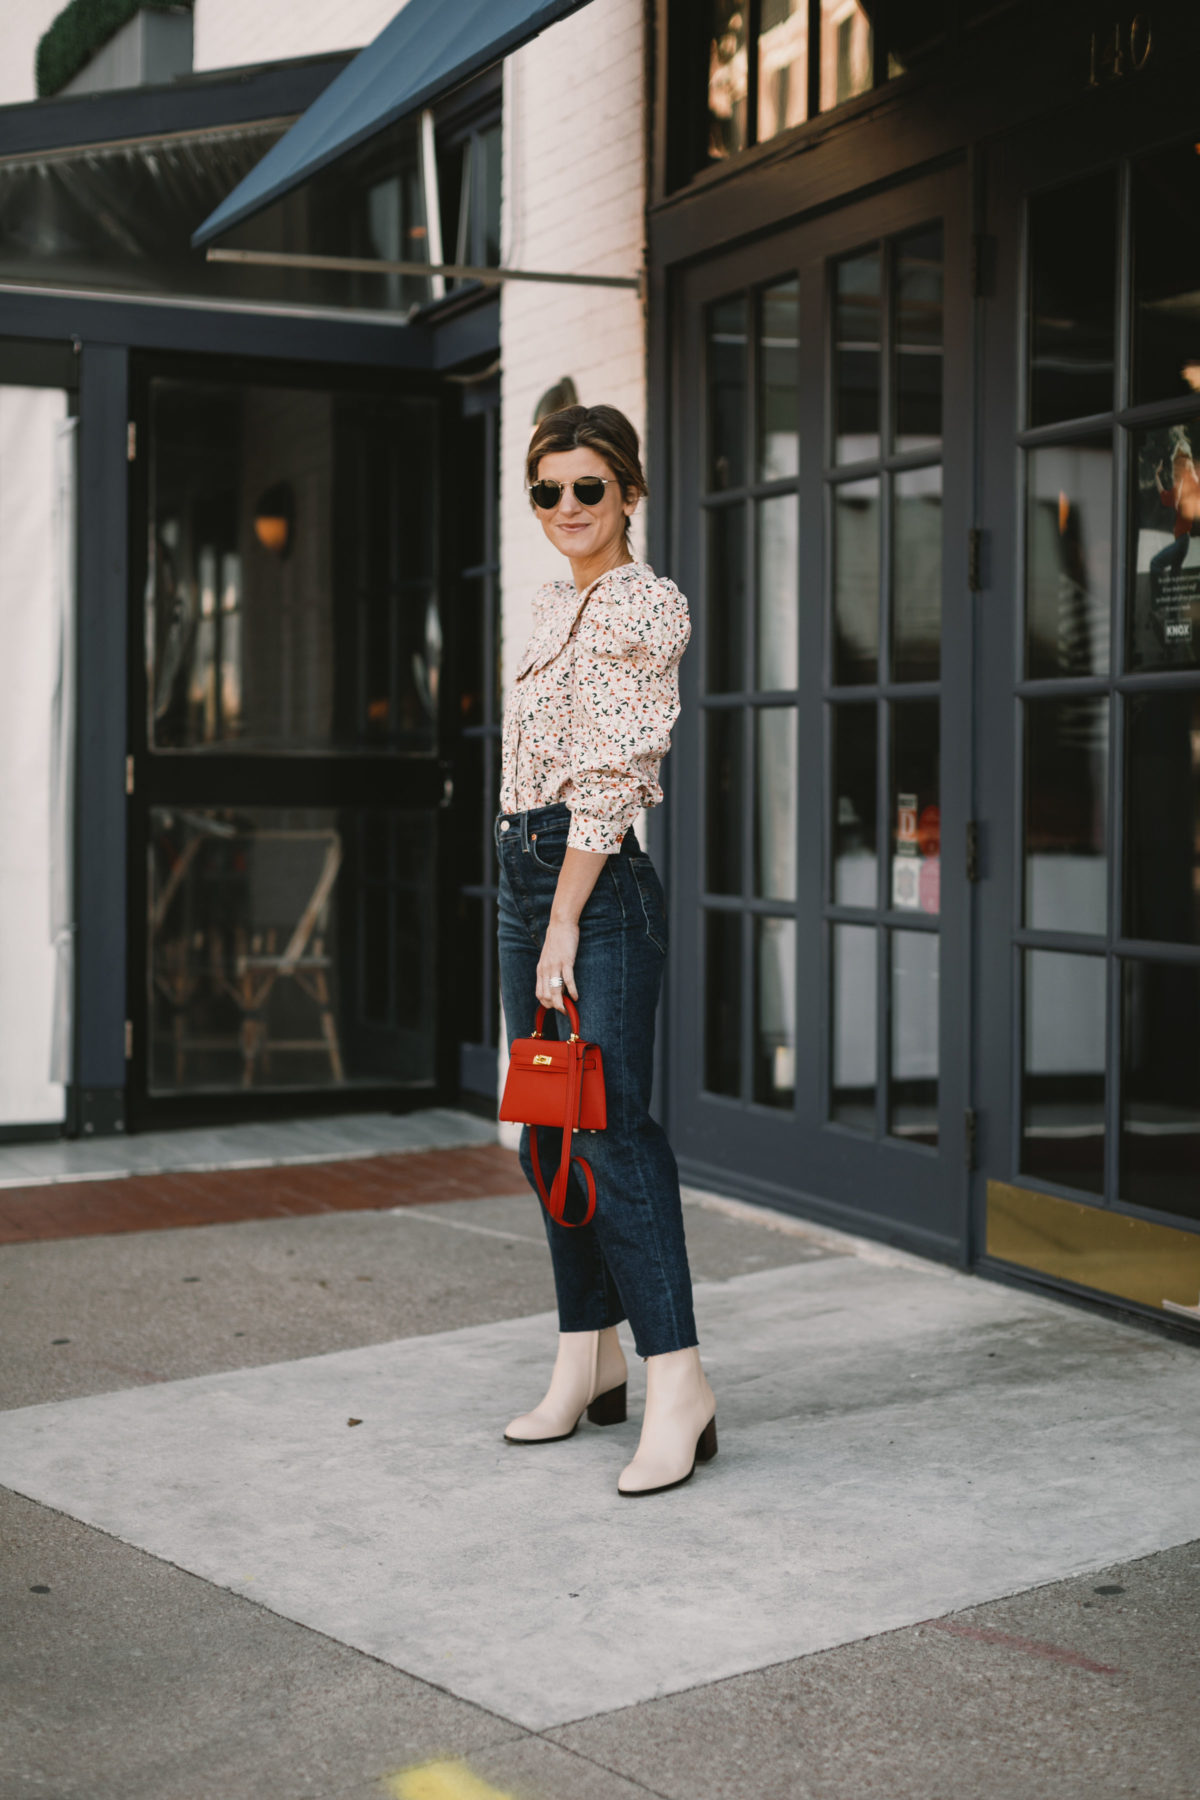 Bright Butler wearing CeliaB floral shirt and J.Crew booties